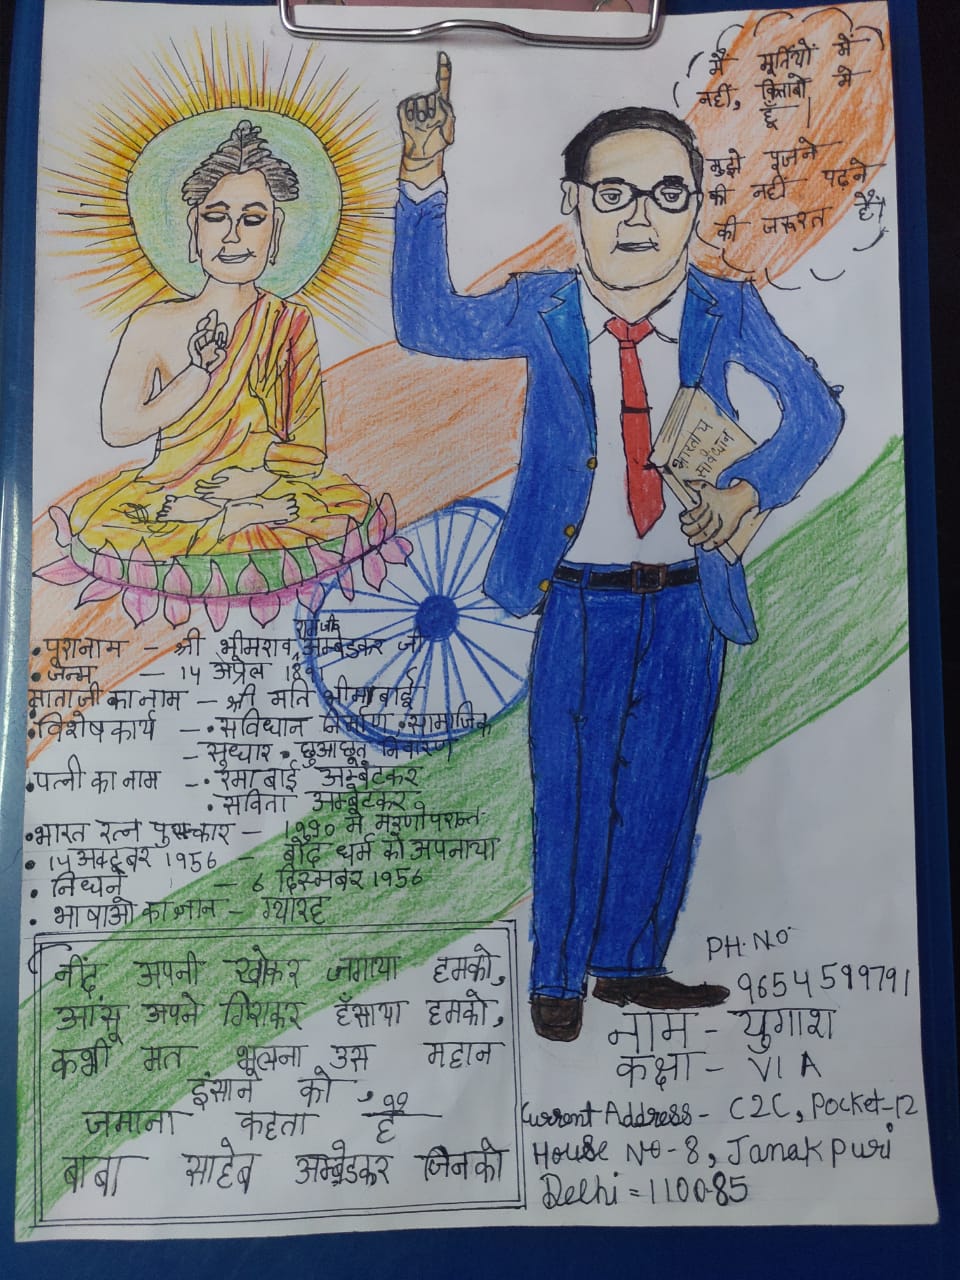 This is Dr. B.R Ambedkar. He was the chairman of the drafting committee of  the constitution of India. He was a jurist, economist, social reformer and  many more. I did this drawing